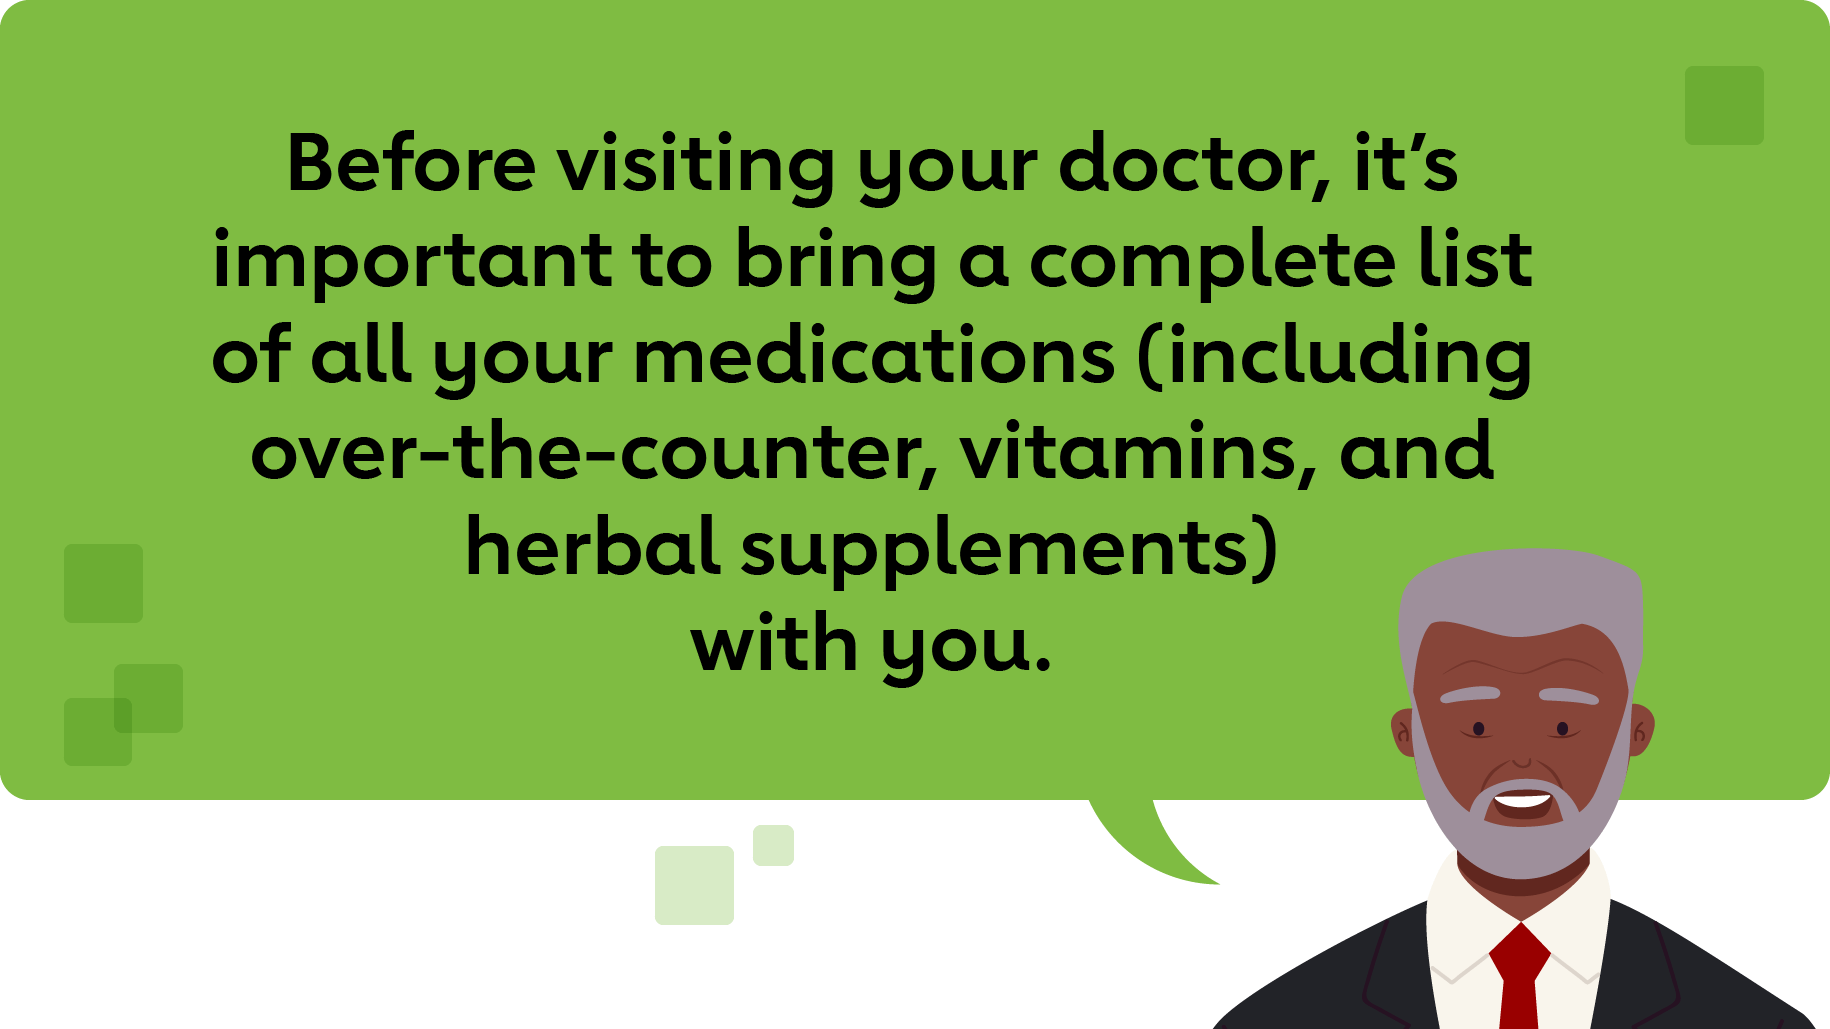 Before visiting your doctor, it’s important to bring a complete list of all your medications (including over the counter, vitamins, and herbal supplements) with you.